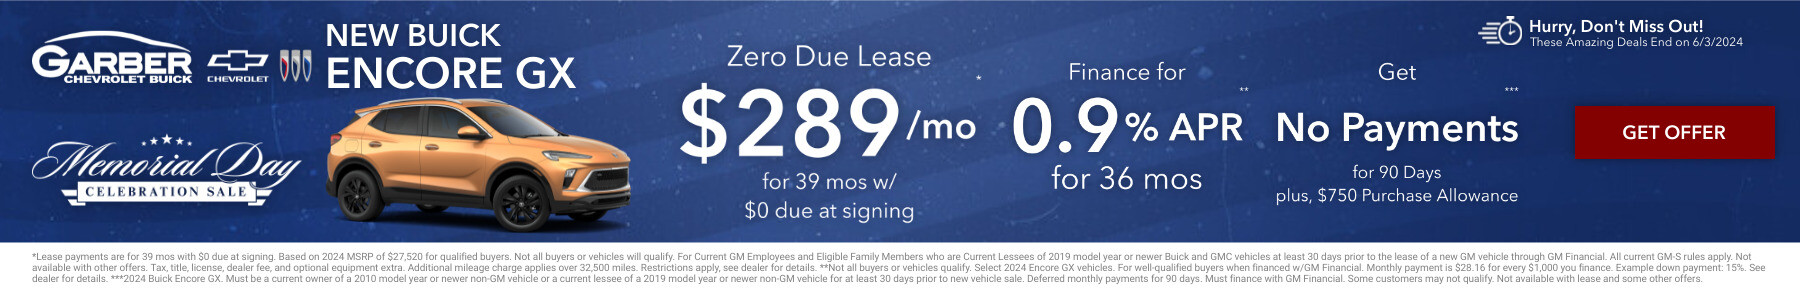 New Buick Encore GX Current Deals and Offers in Chesaning, MI